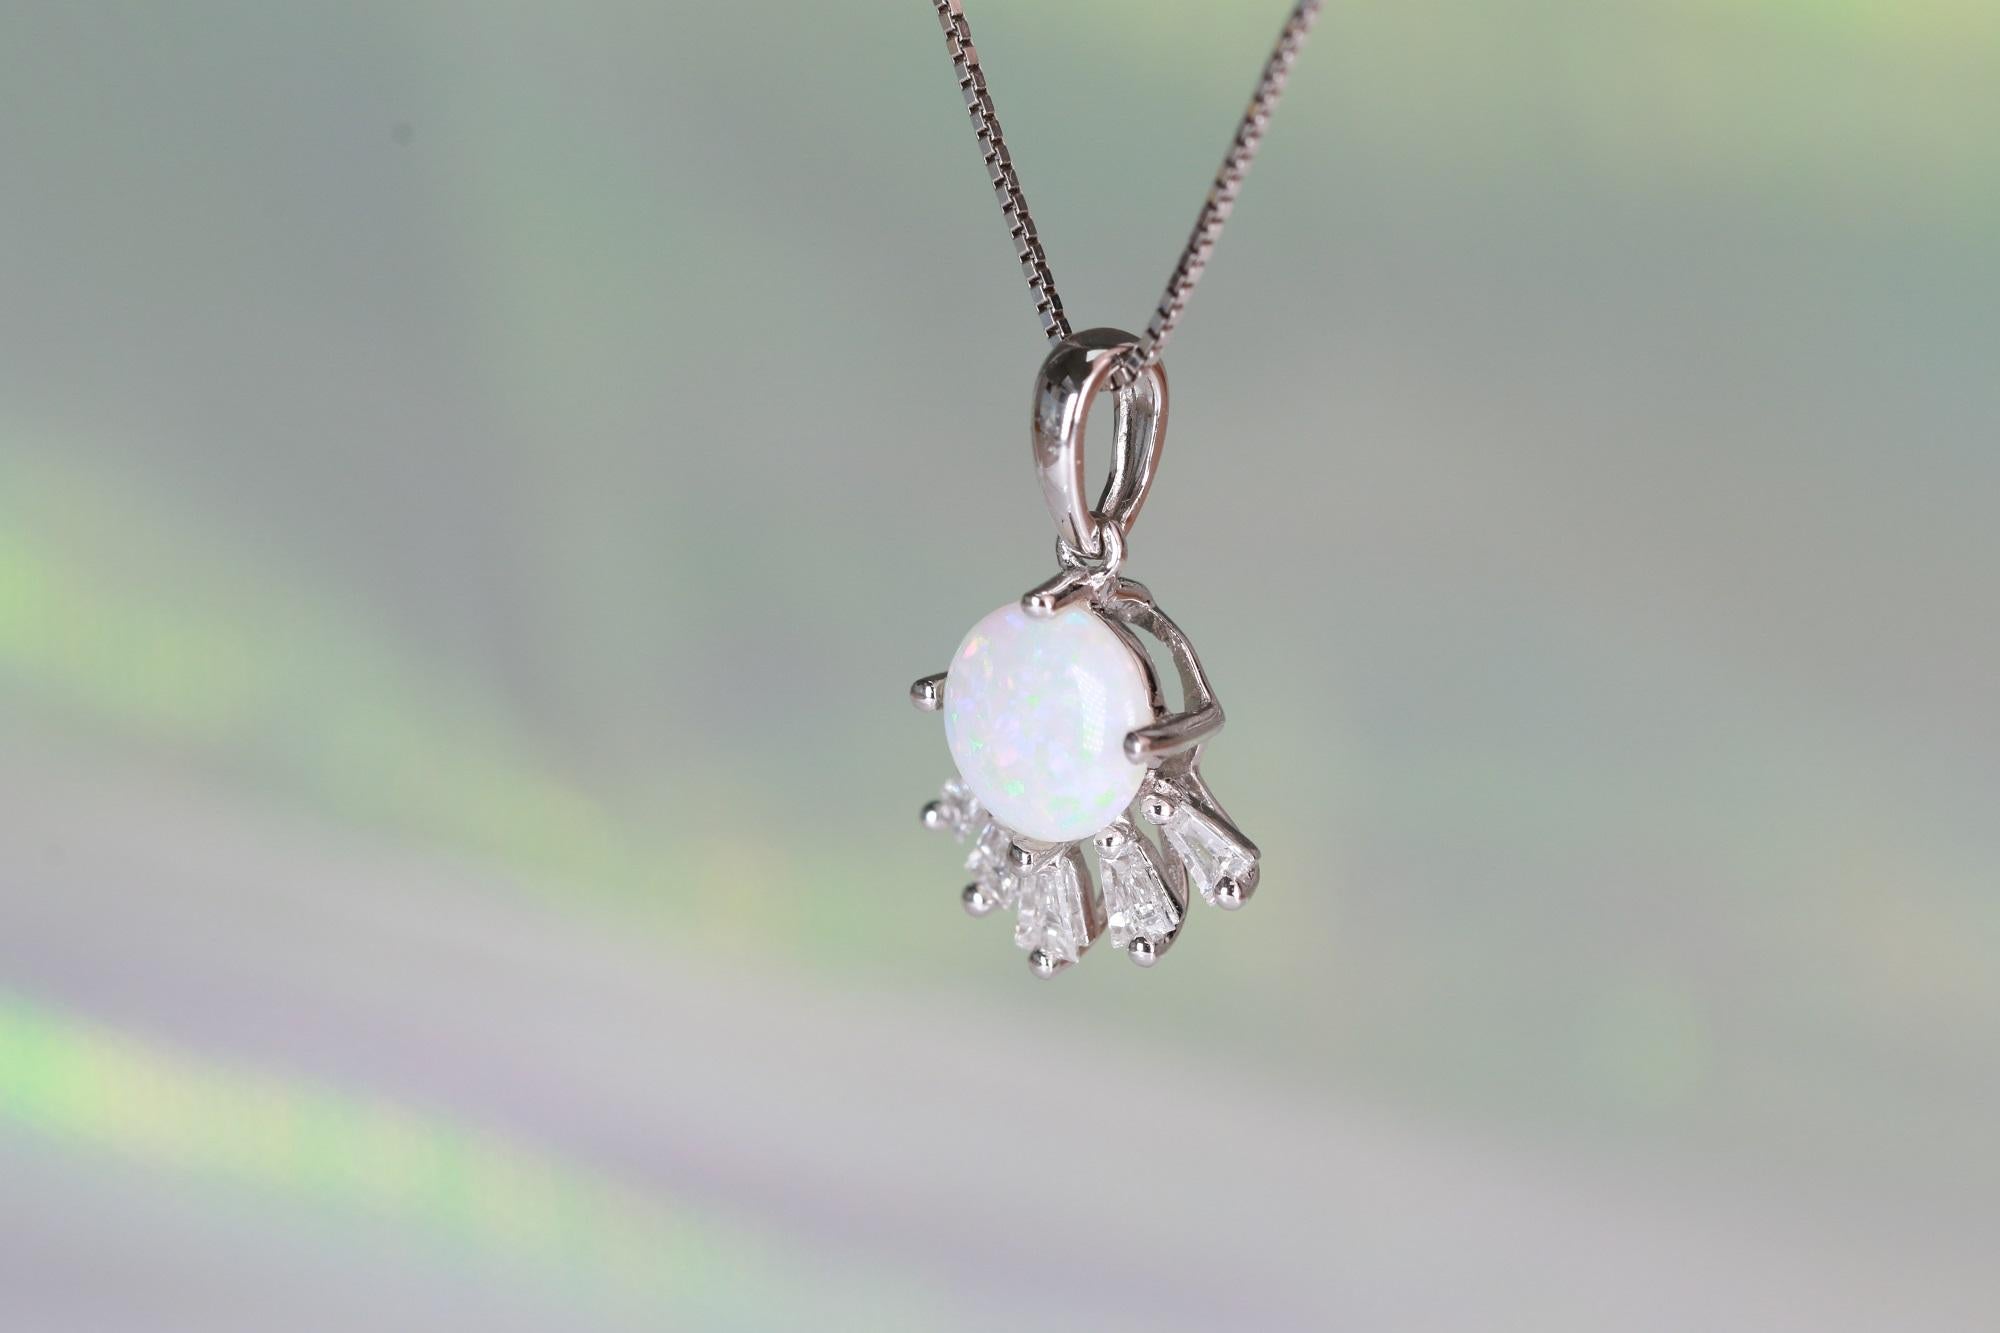 Stunning, timeless and classy eternity Unique Pendant. Decorate yourself in luxury with this Gin & Grace Pendant. The 18k White Gold jewelry boasts Round Cut Prong Setting Genuine Ethiopian Opal (1 pcs) 0.48 Carat, along with Natural Baguette cut